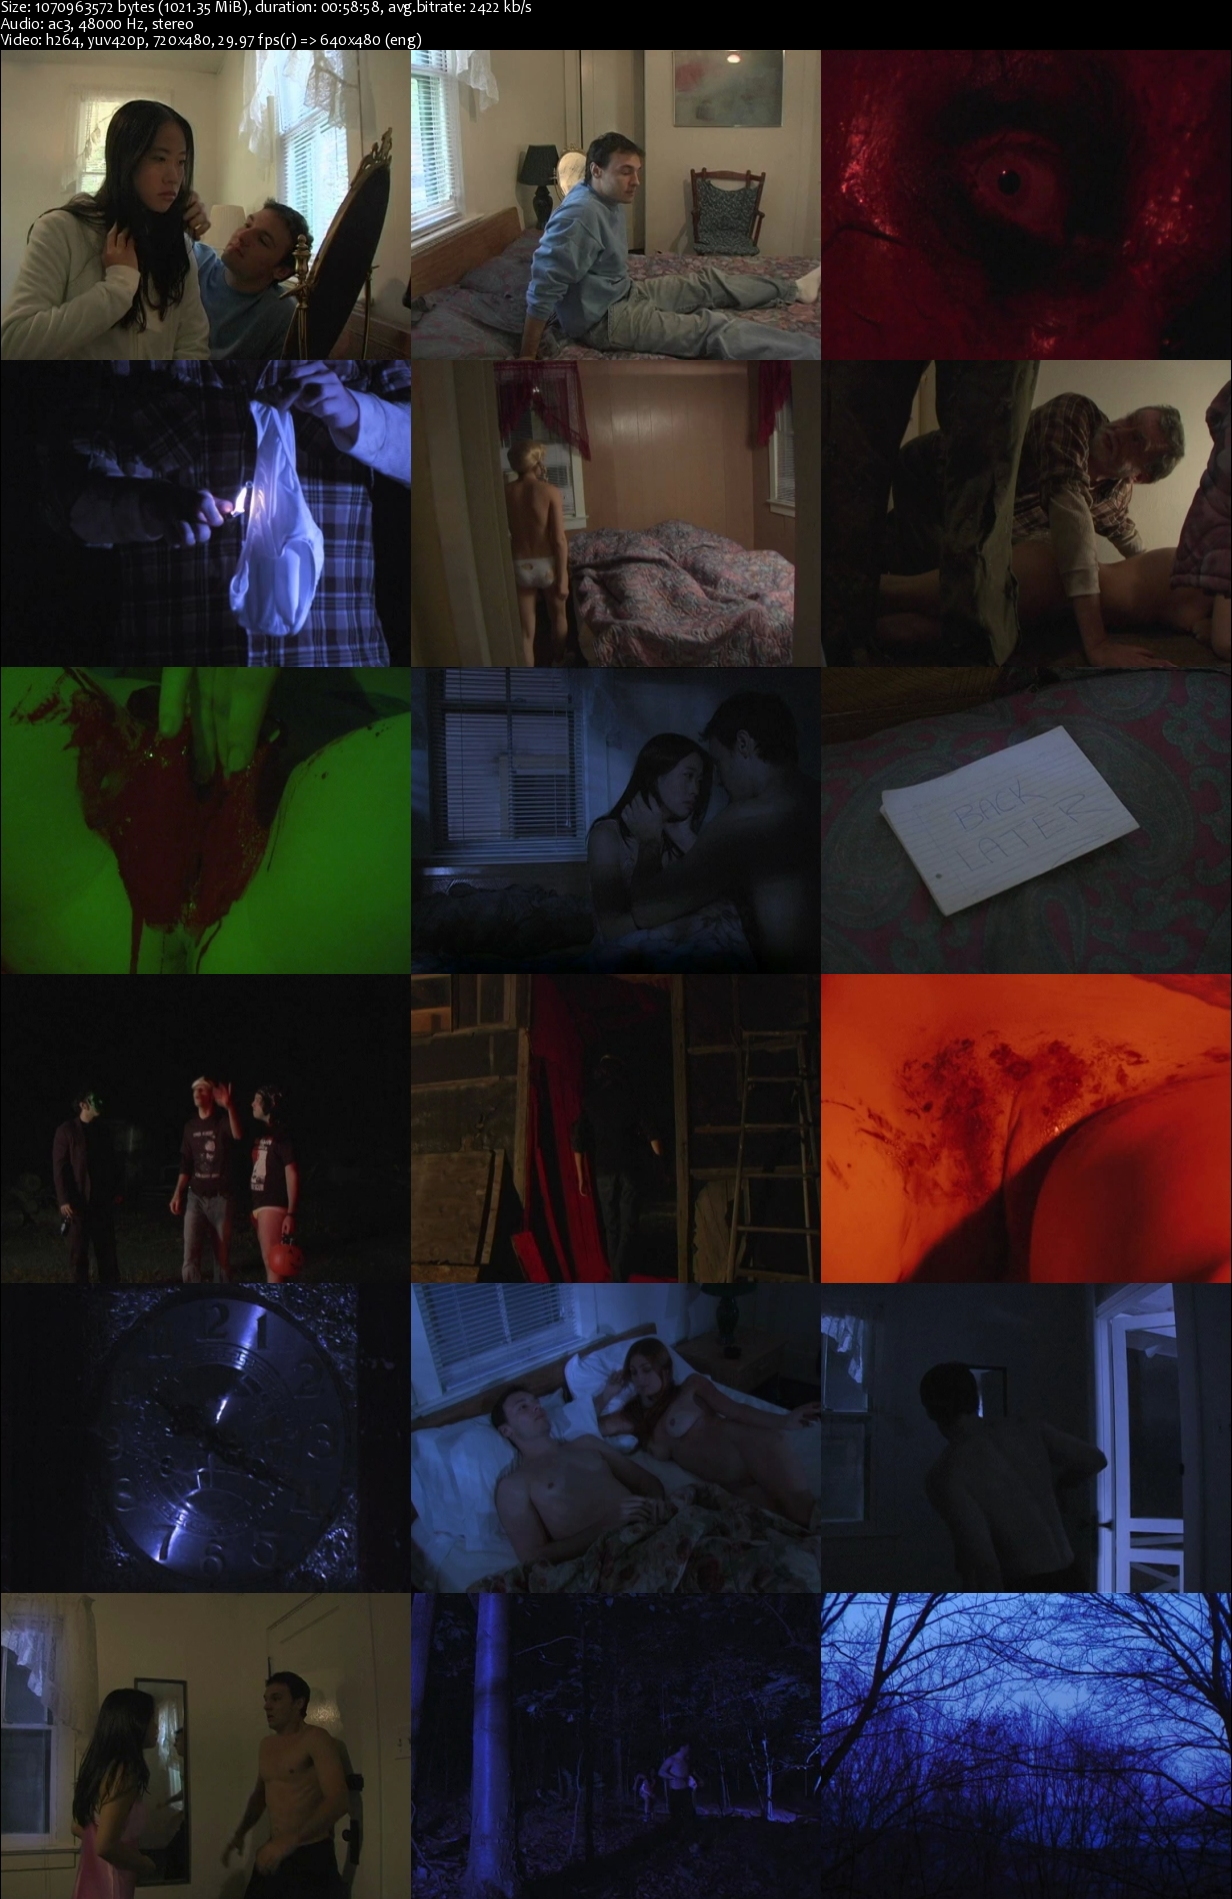 blood_and_sex_nightmare_2008